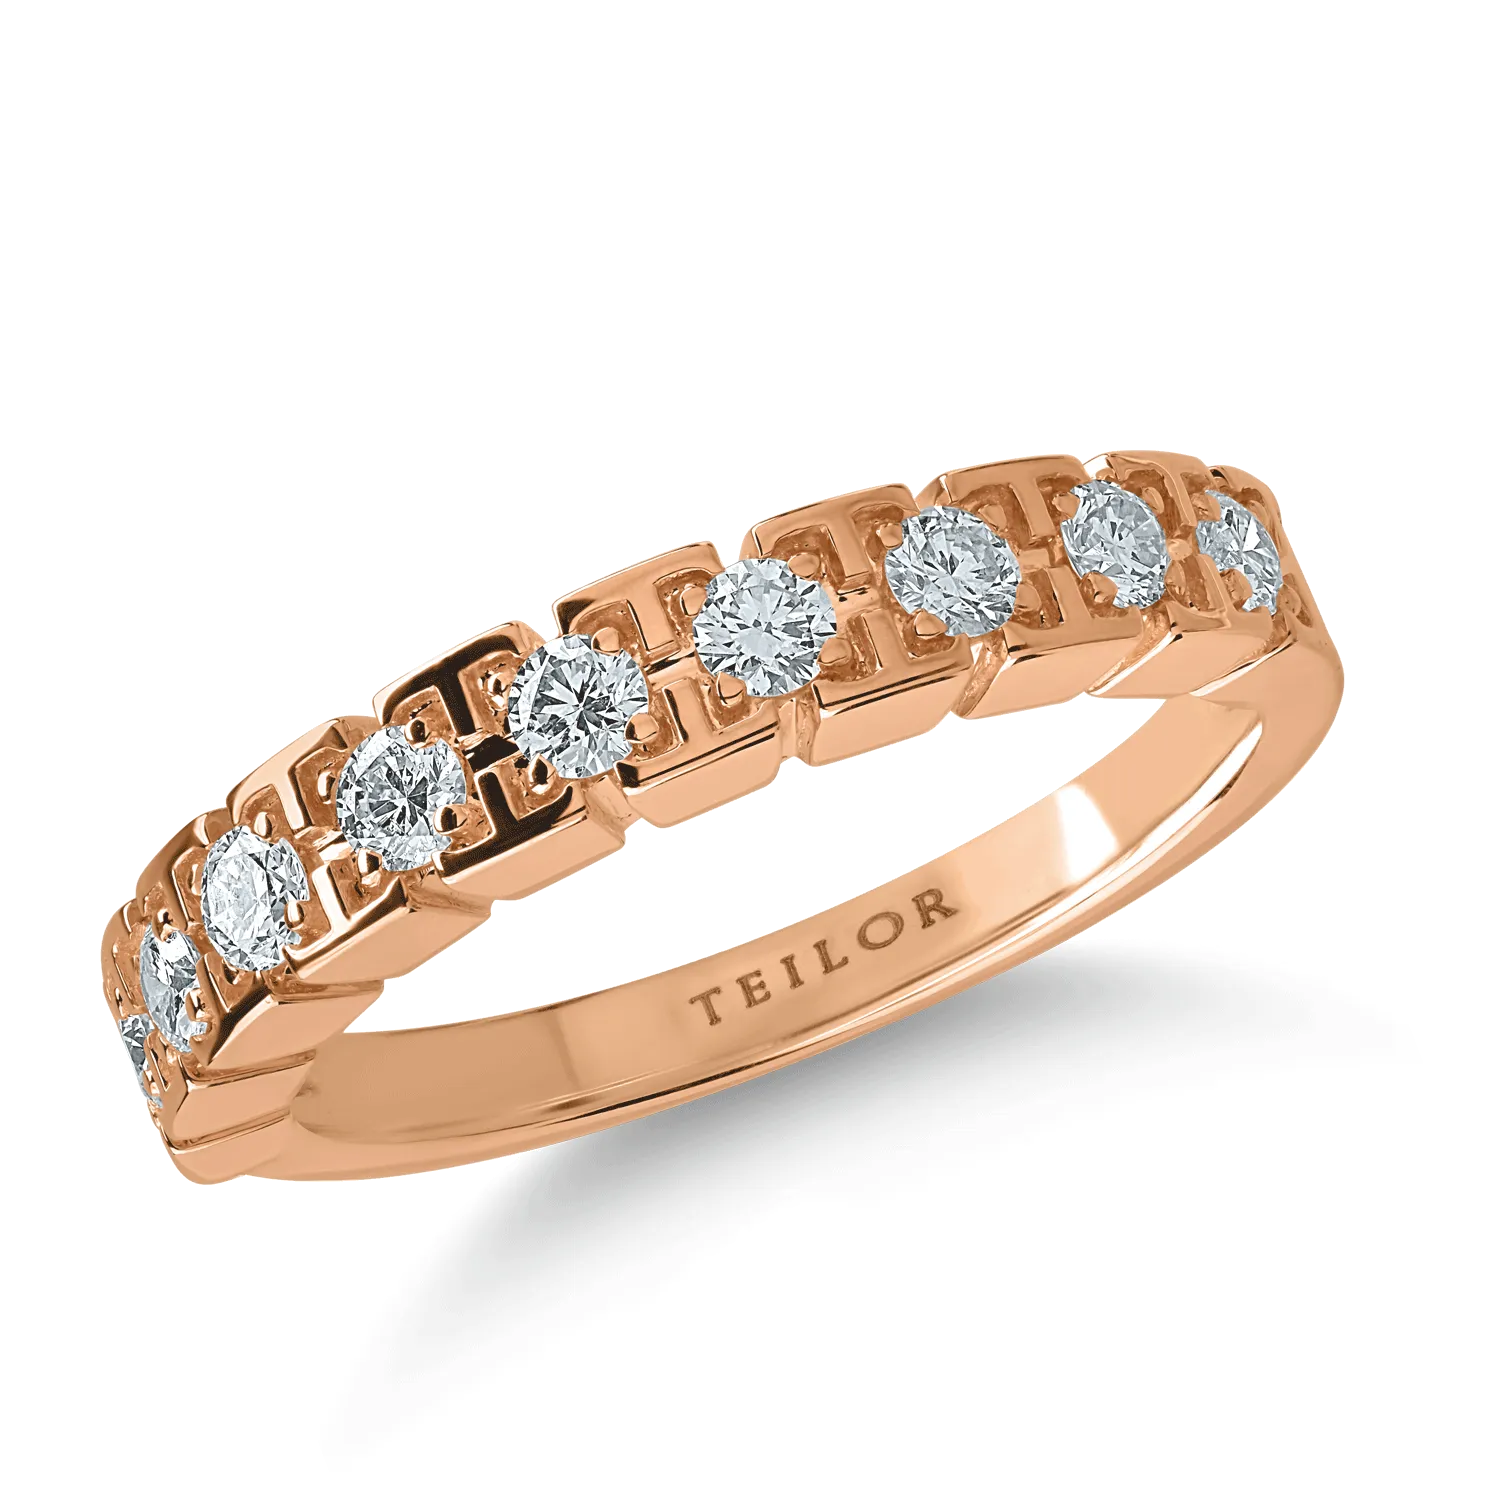 Half eternity ring in rose gold with 0.3ct diamonds